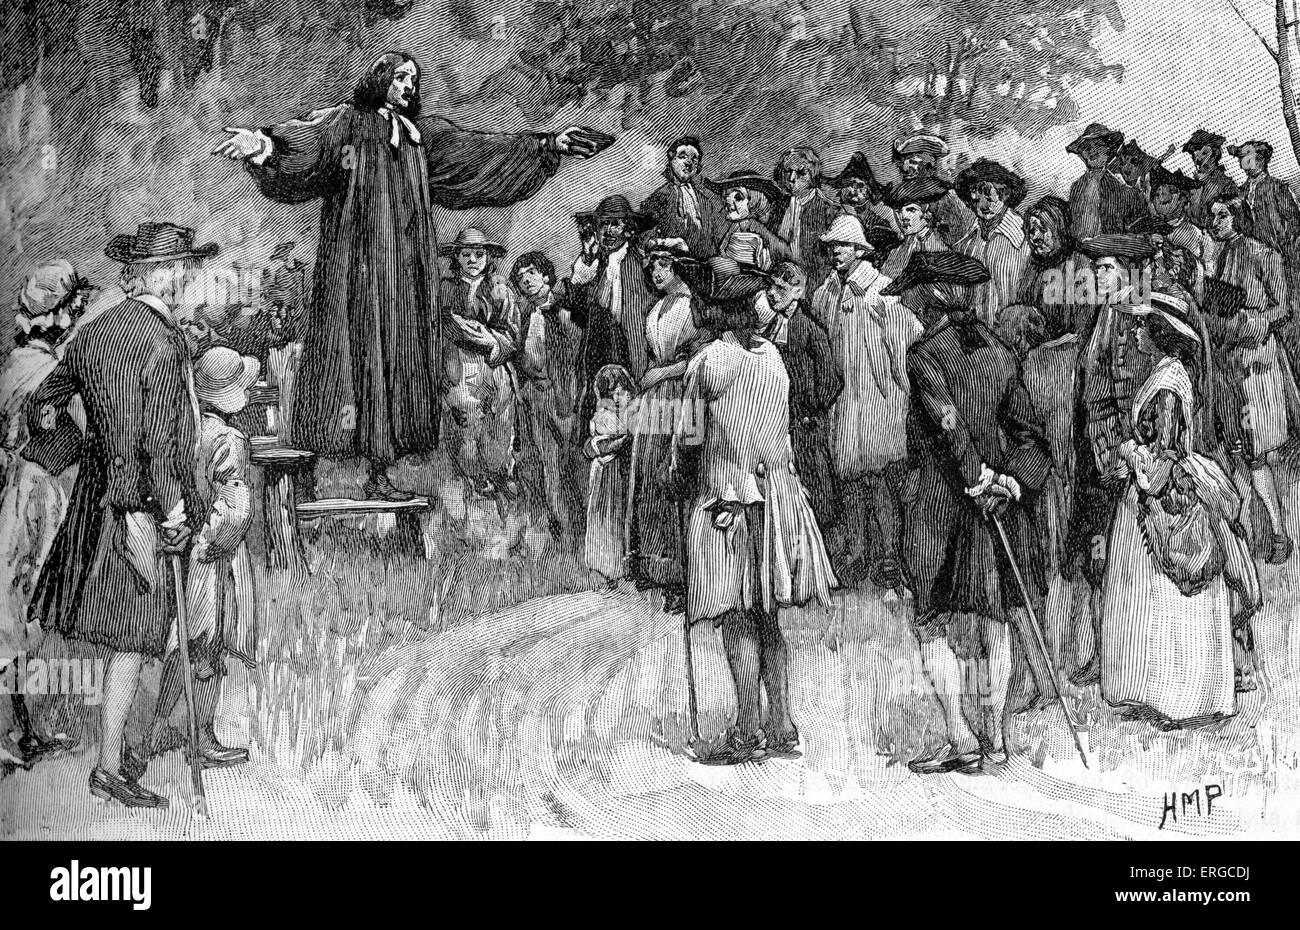 George Whitefield preaching. English Anglican priest and a founder of Methodism. Preached during the Great Awakening in 1700s in Europe and American colonies. 16 December 1714 – 30 September 1770. Stock Photo